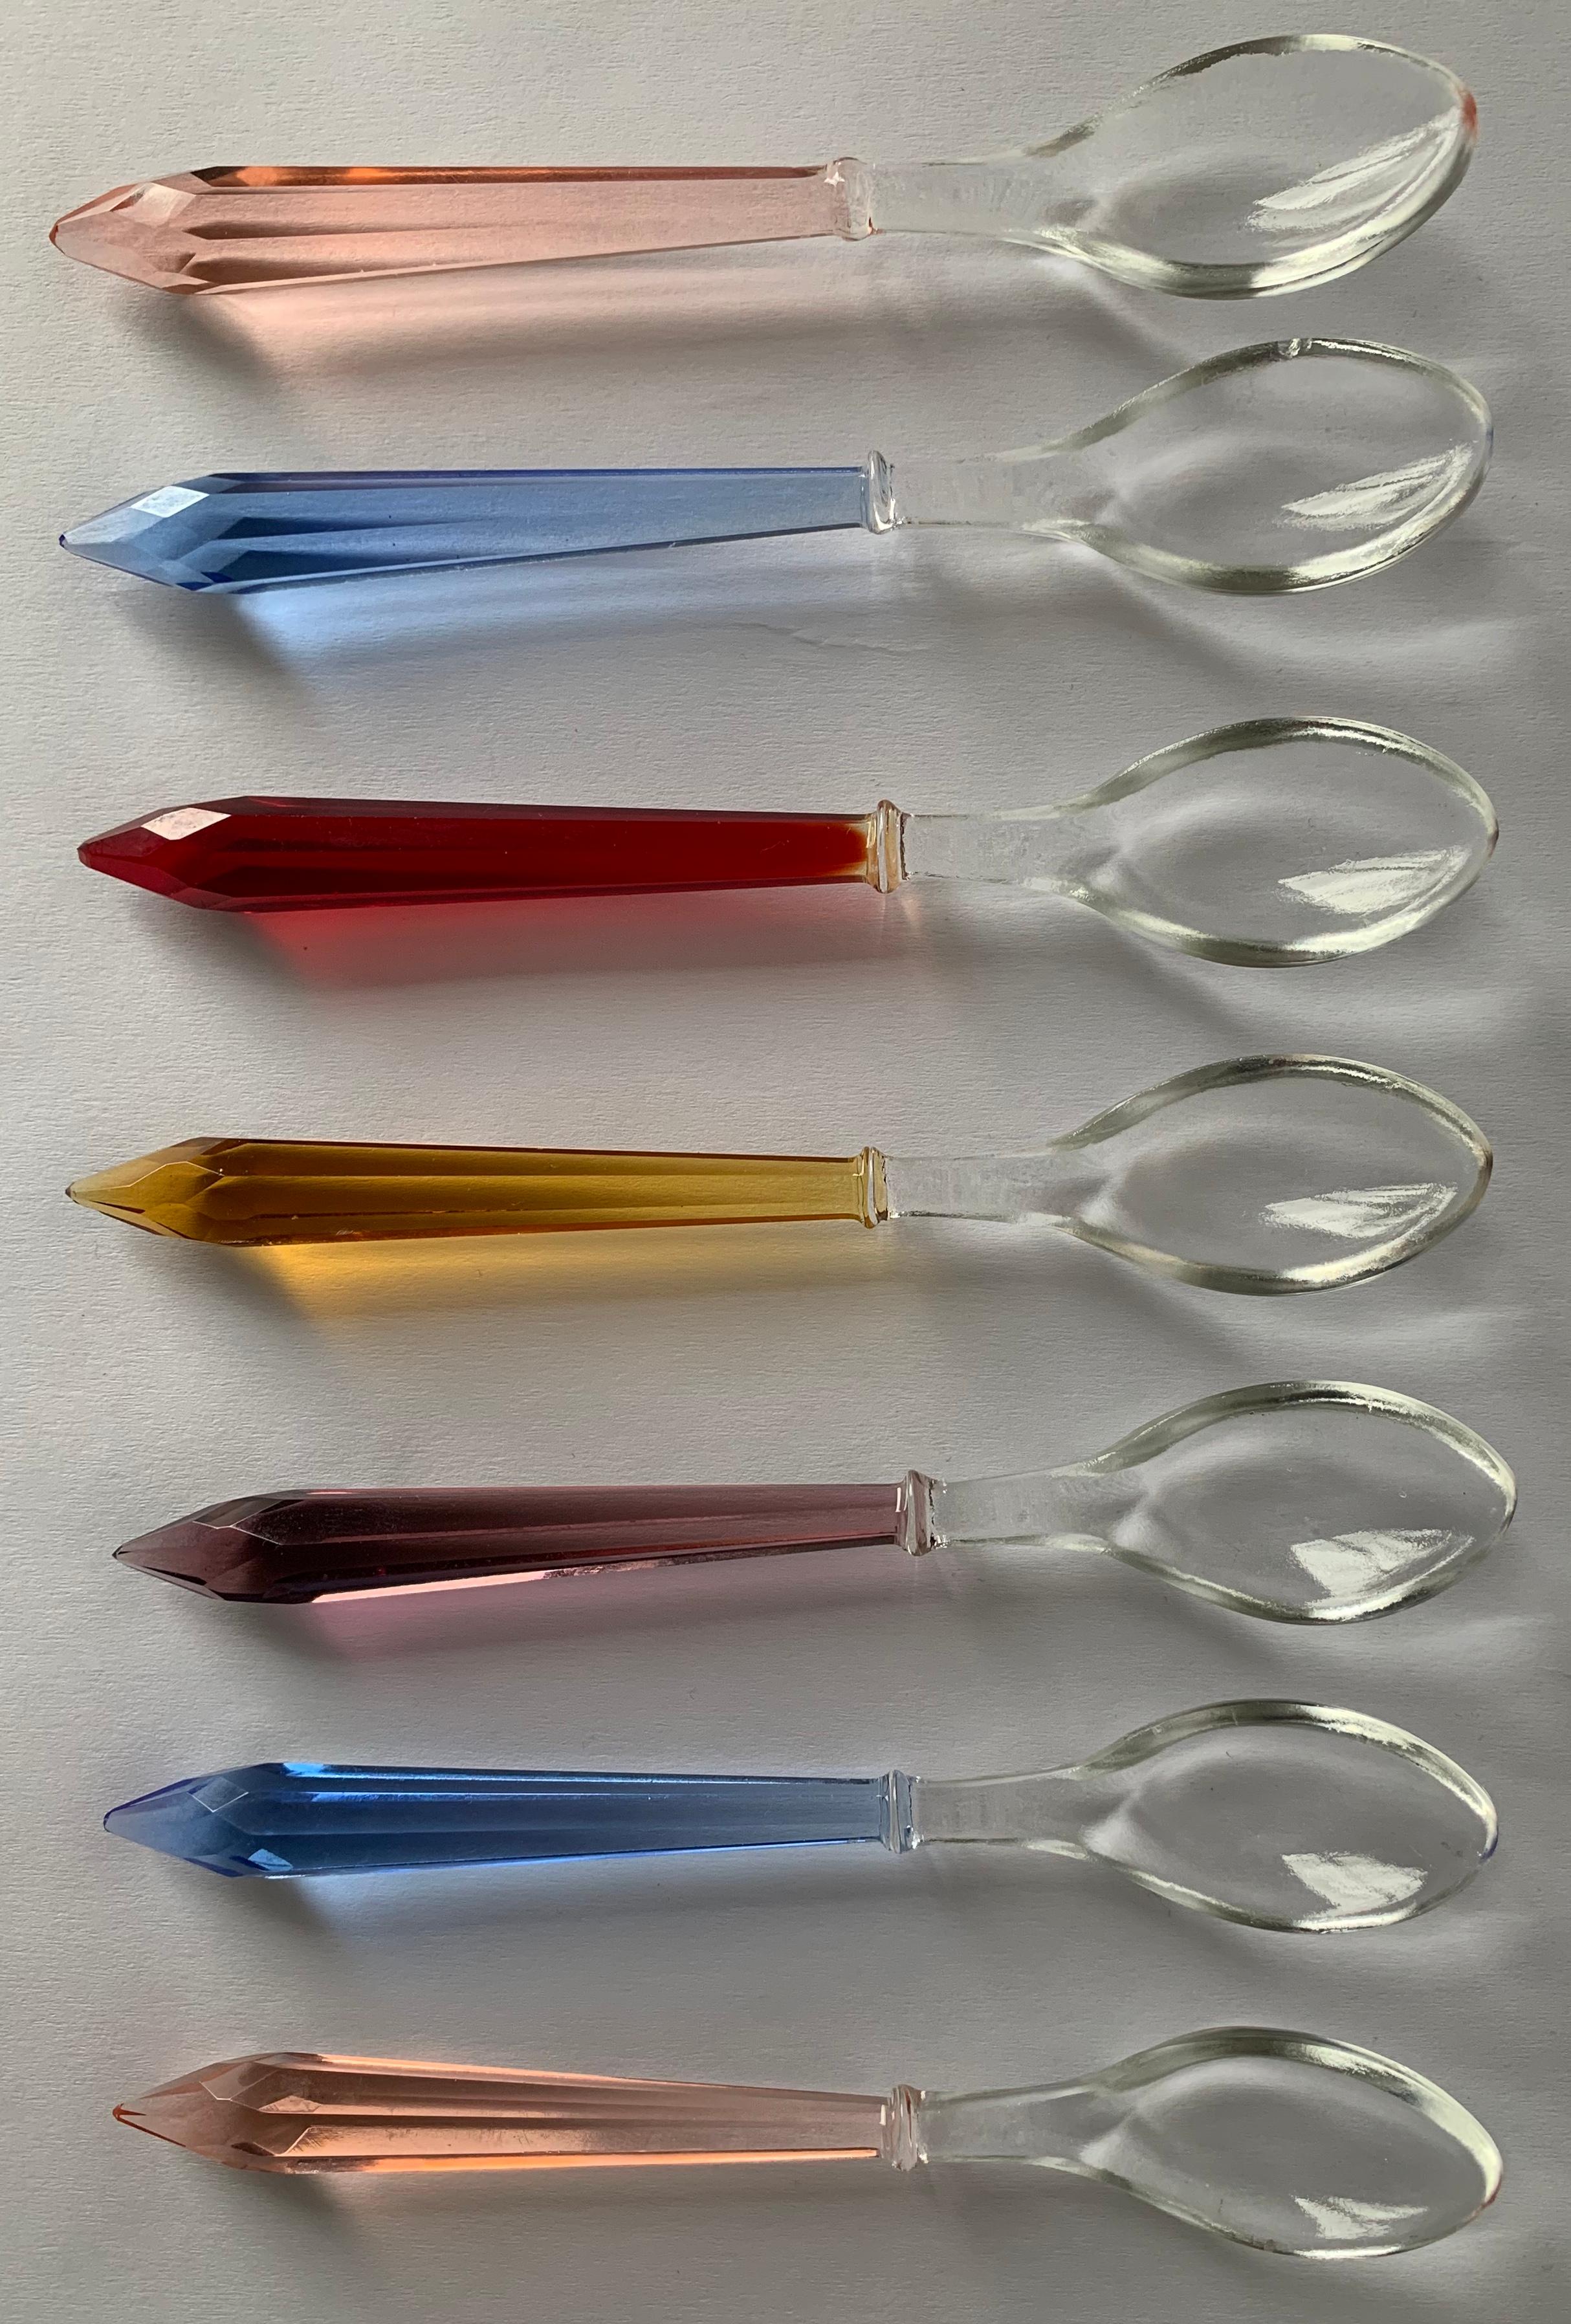 Set of 7 midcentury small glass serving or demitasse spoons. Each spoon has a colored cut glass prism handle in red, blue, orange, purple and pink. No makers mark or signature.